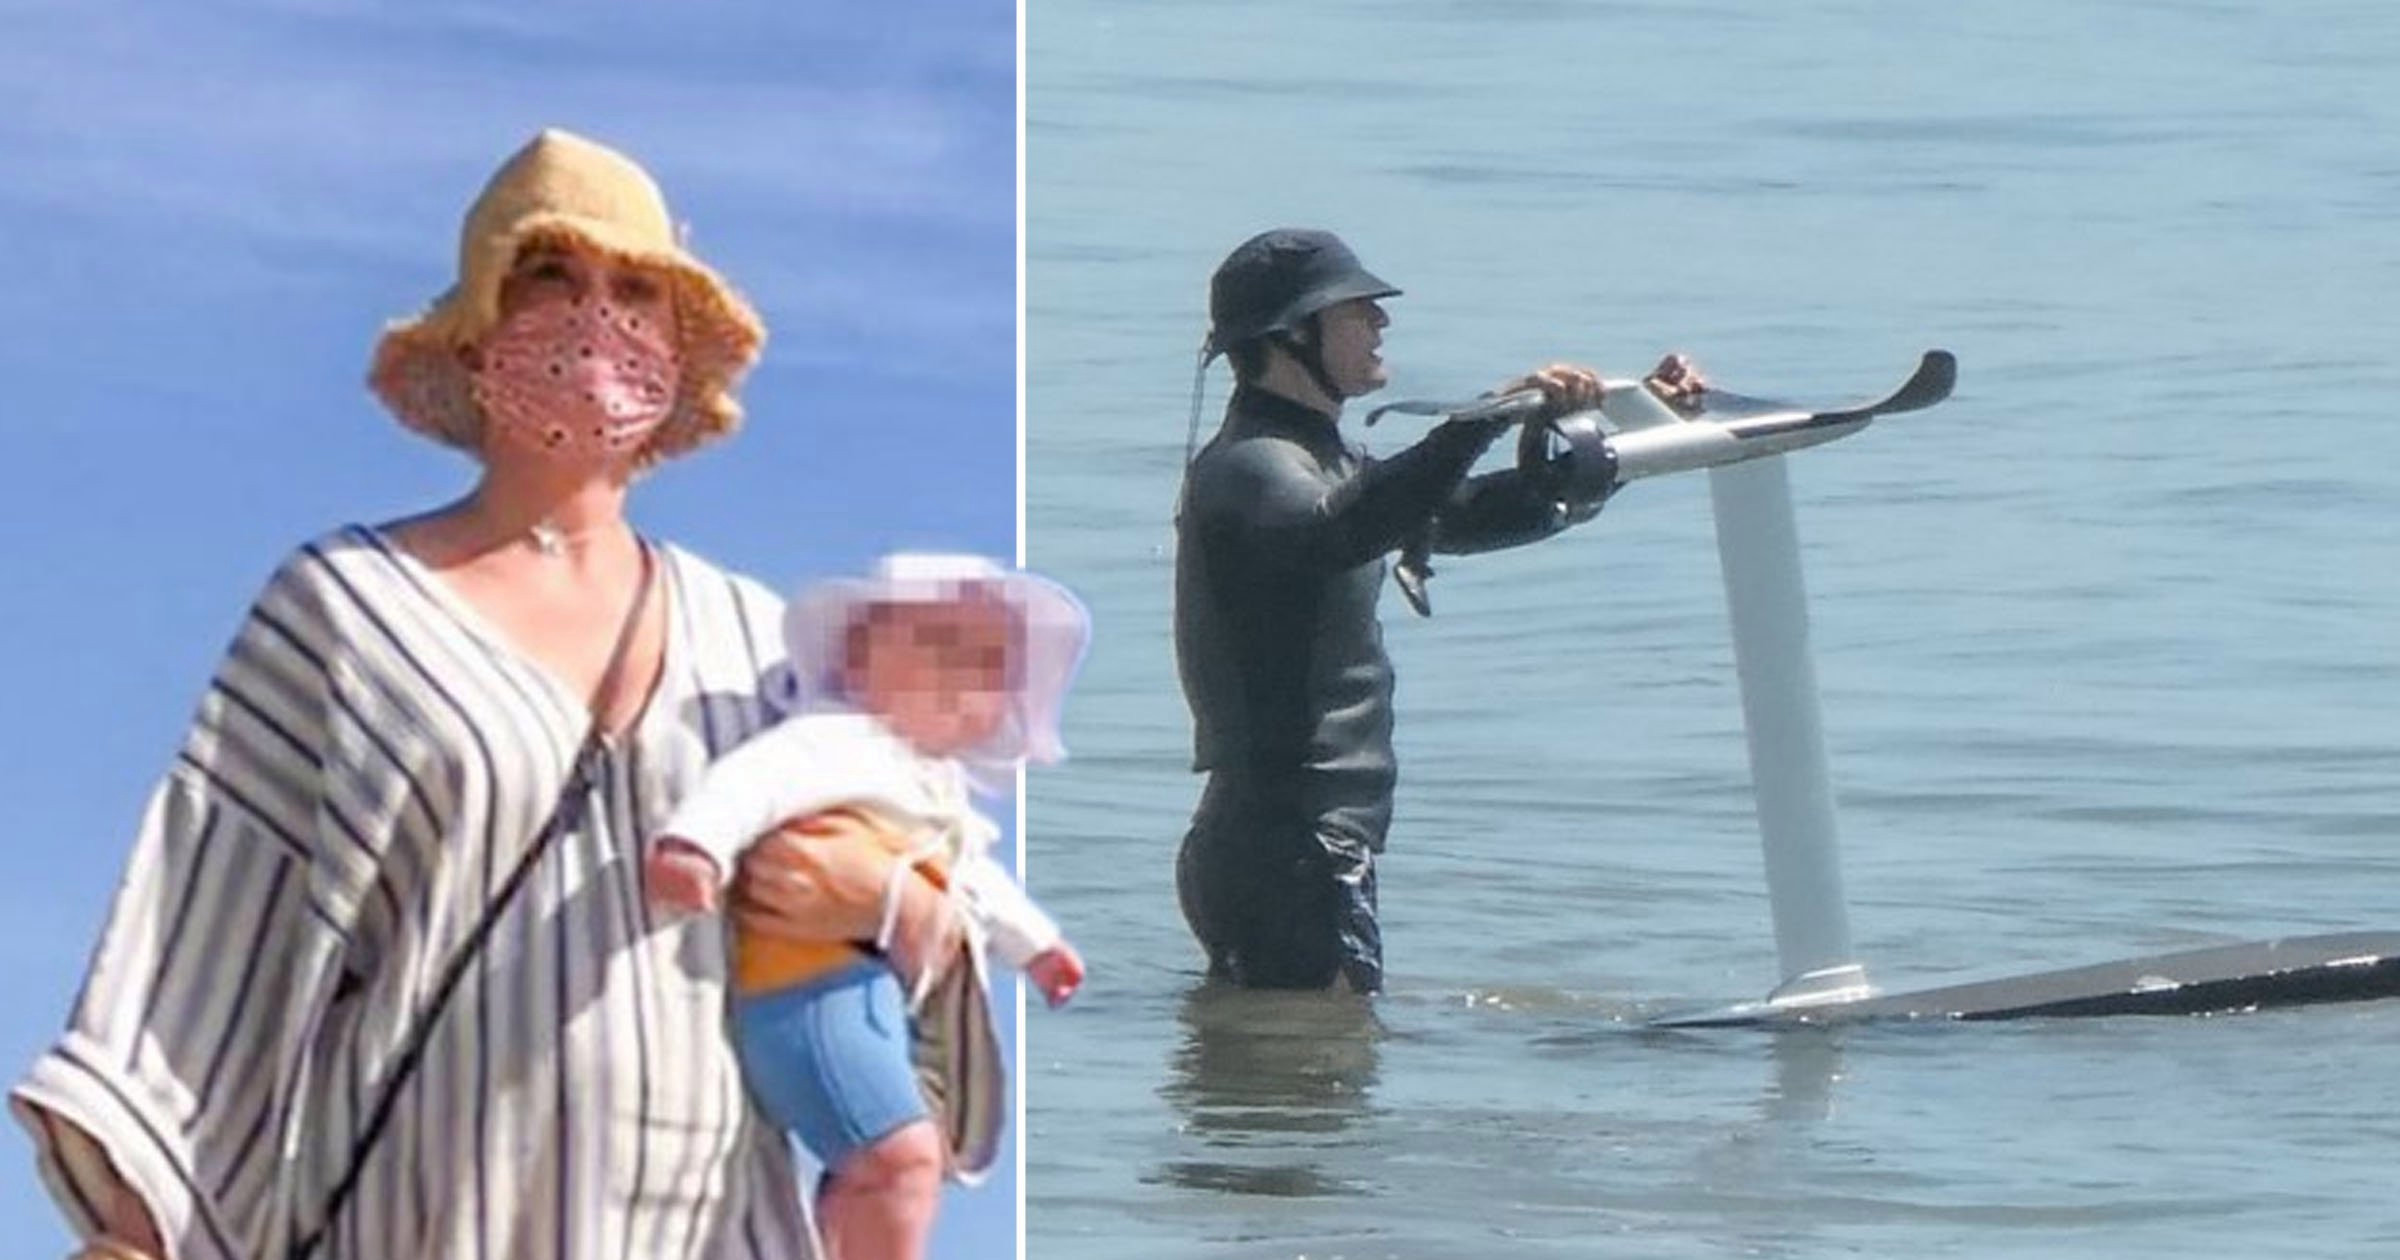 Katy Perry steps out for Californian beach walk with new baby Daisy Dove as partner Orlando Bloom hits the waves